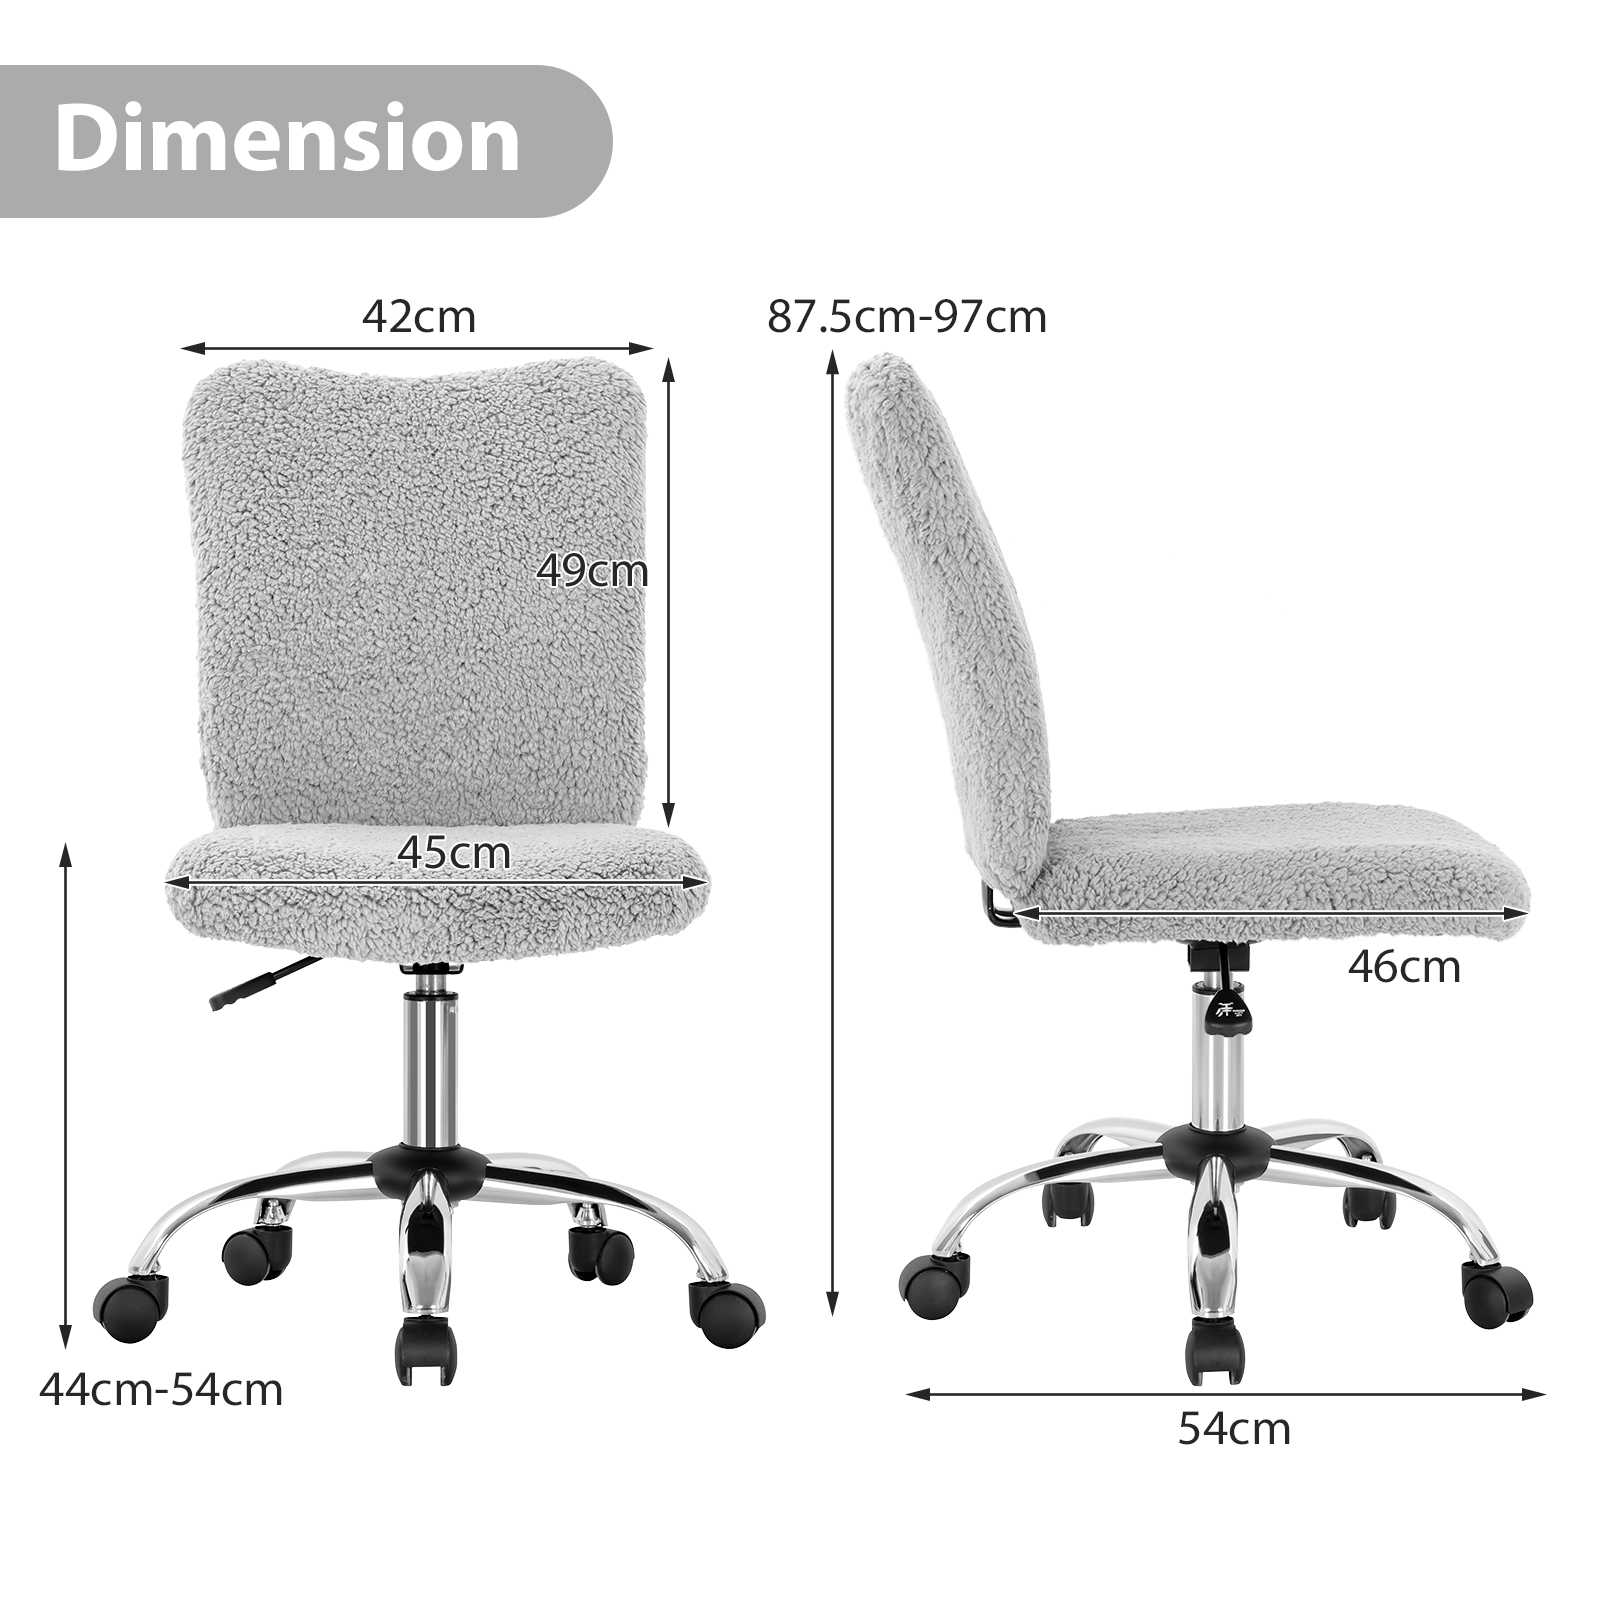 Adjustable20_Faux20_Fur20_Swivel20_Armless20_Office20_Chair20_with20_Chrome20_Base_Grey_size-4.jpg